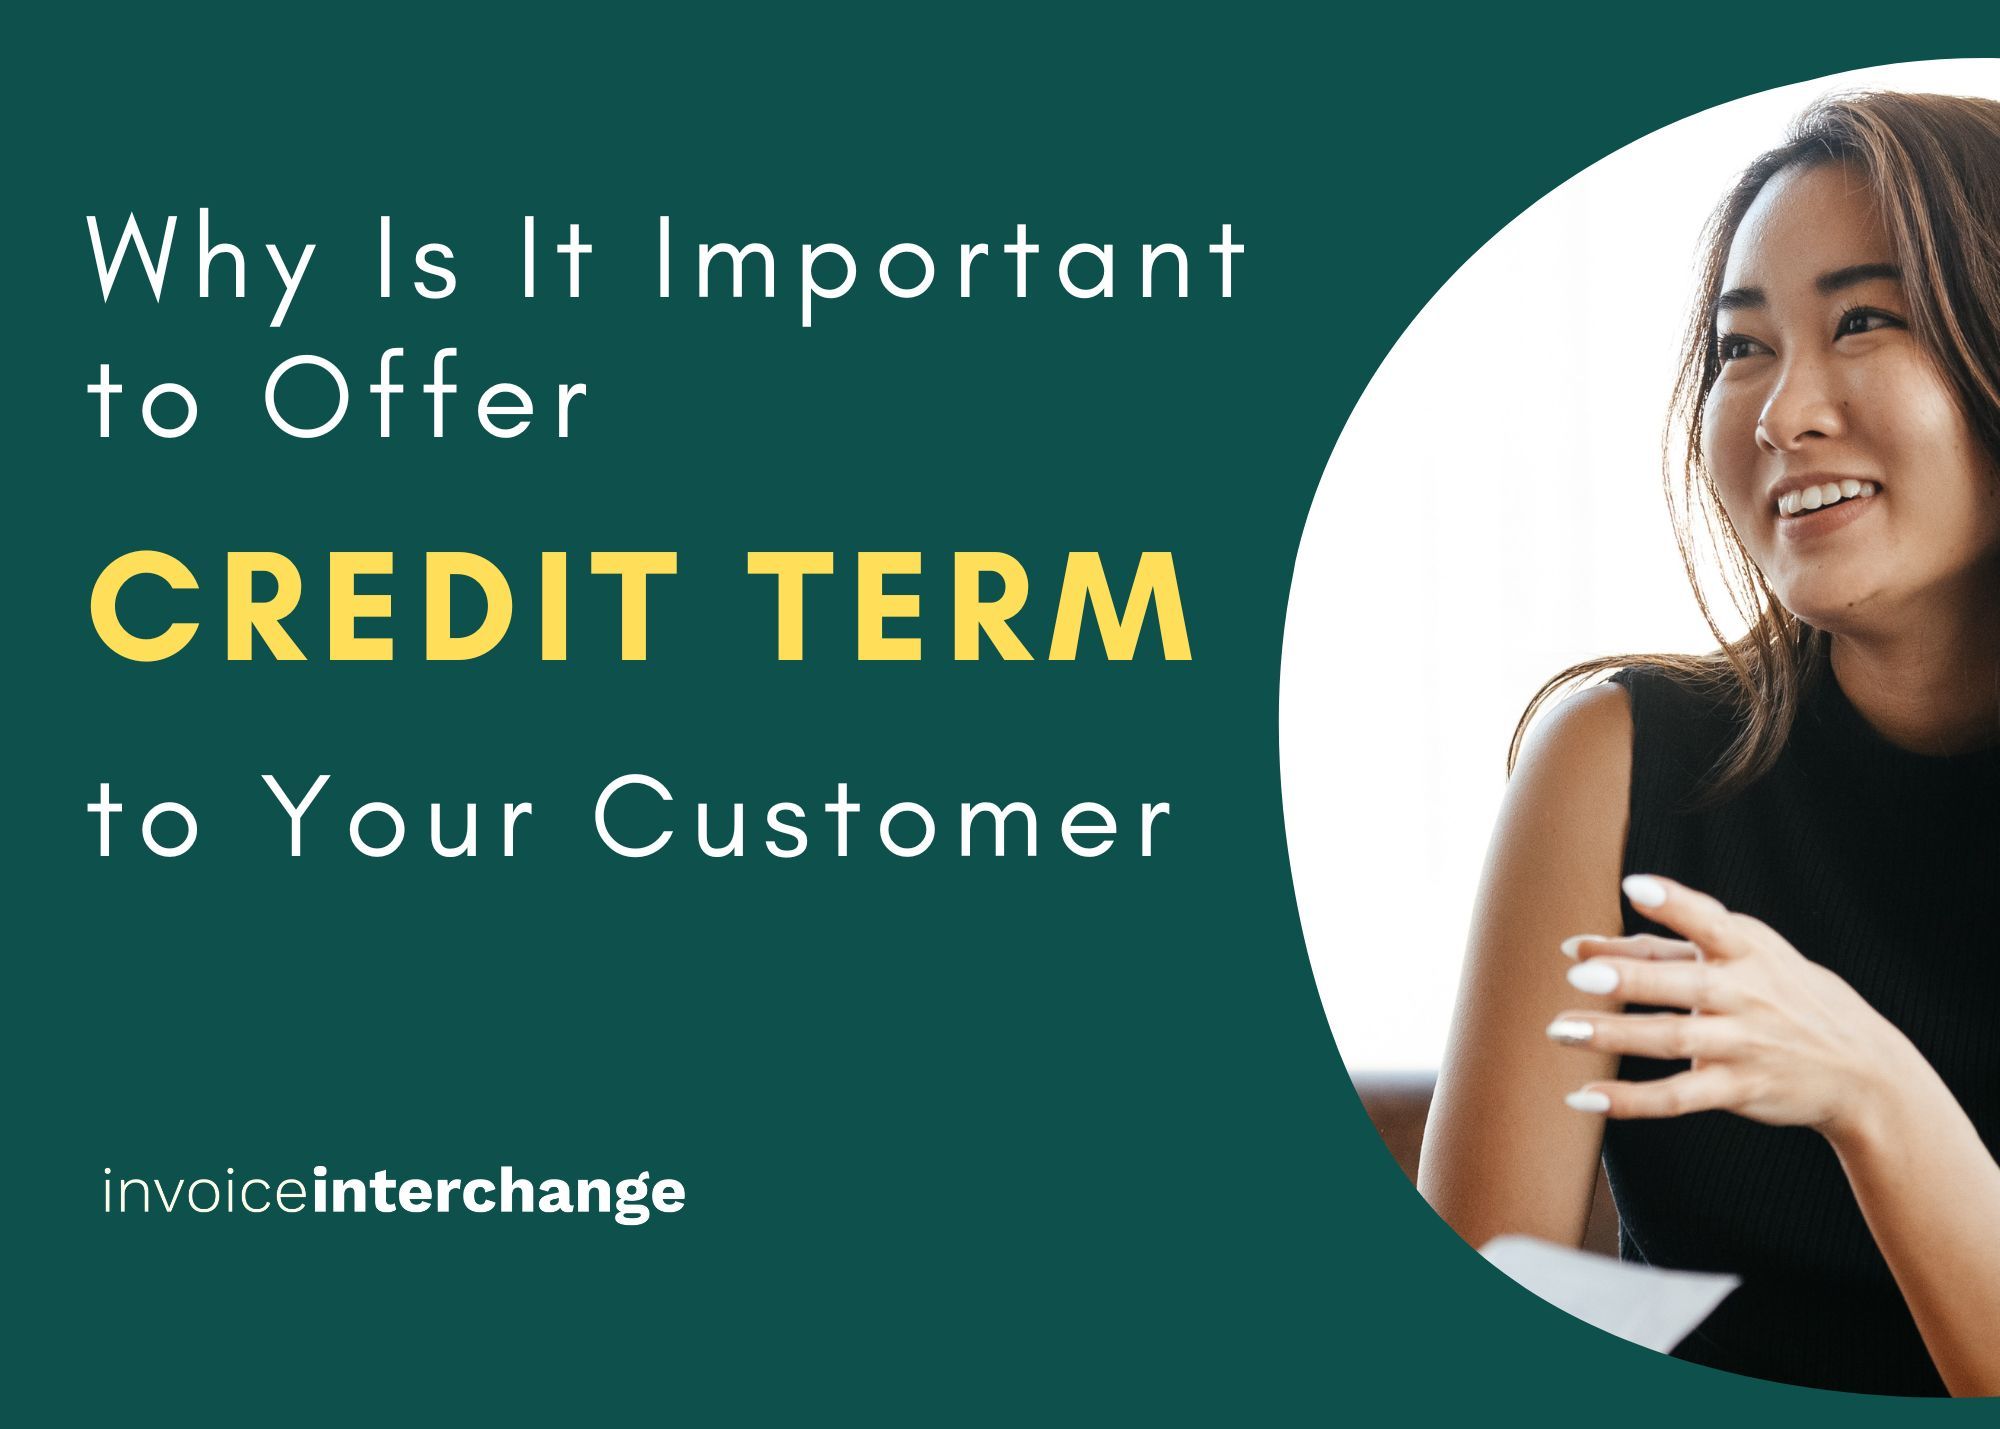 Why Is It Important to Offer Credit Terms to Your Customer